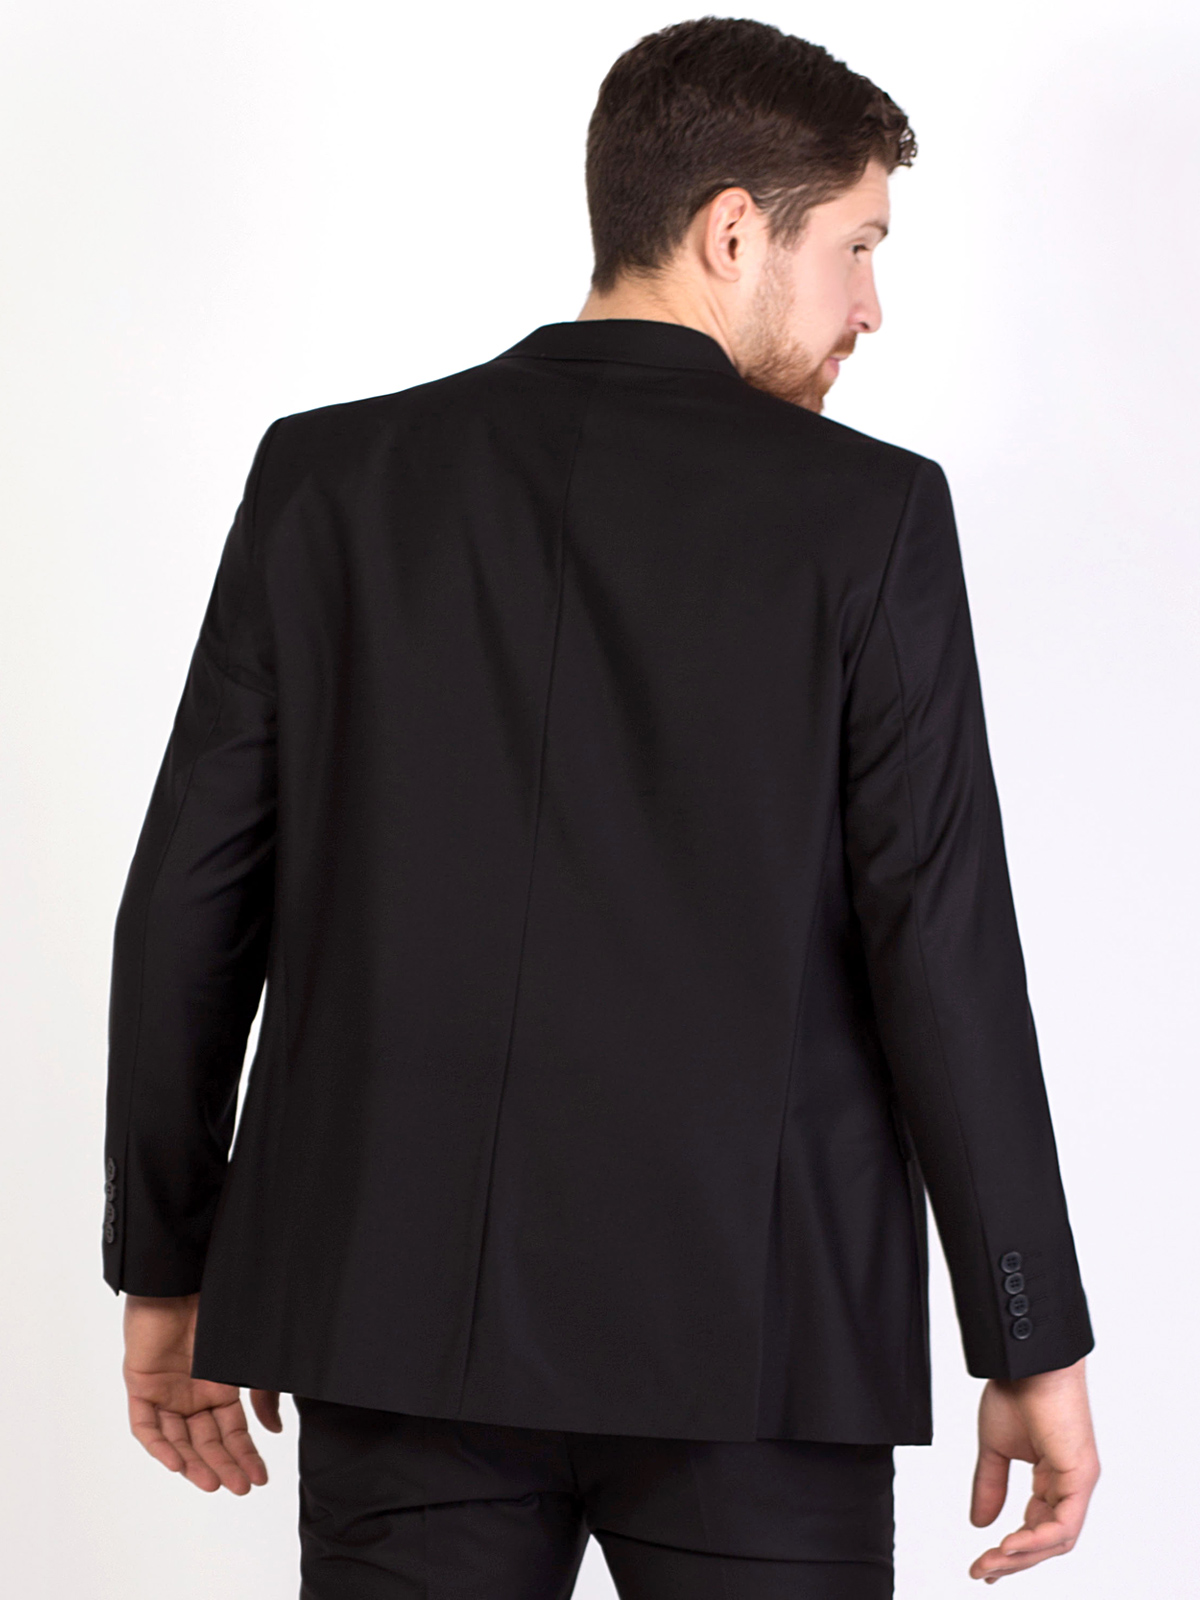  black classic jacket with fitted silhou - 64110 € 108.00 img4